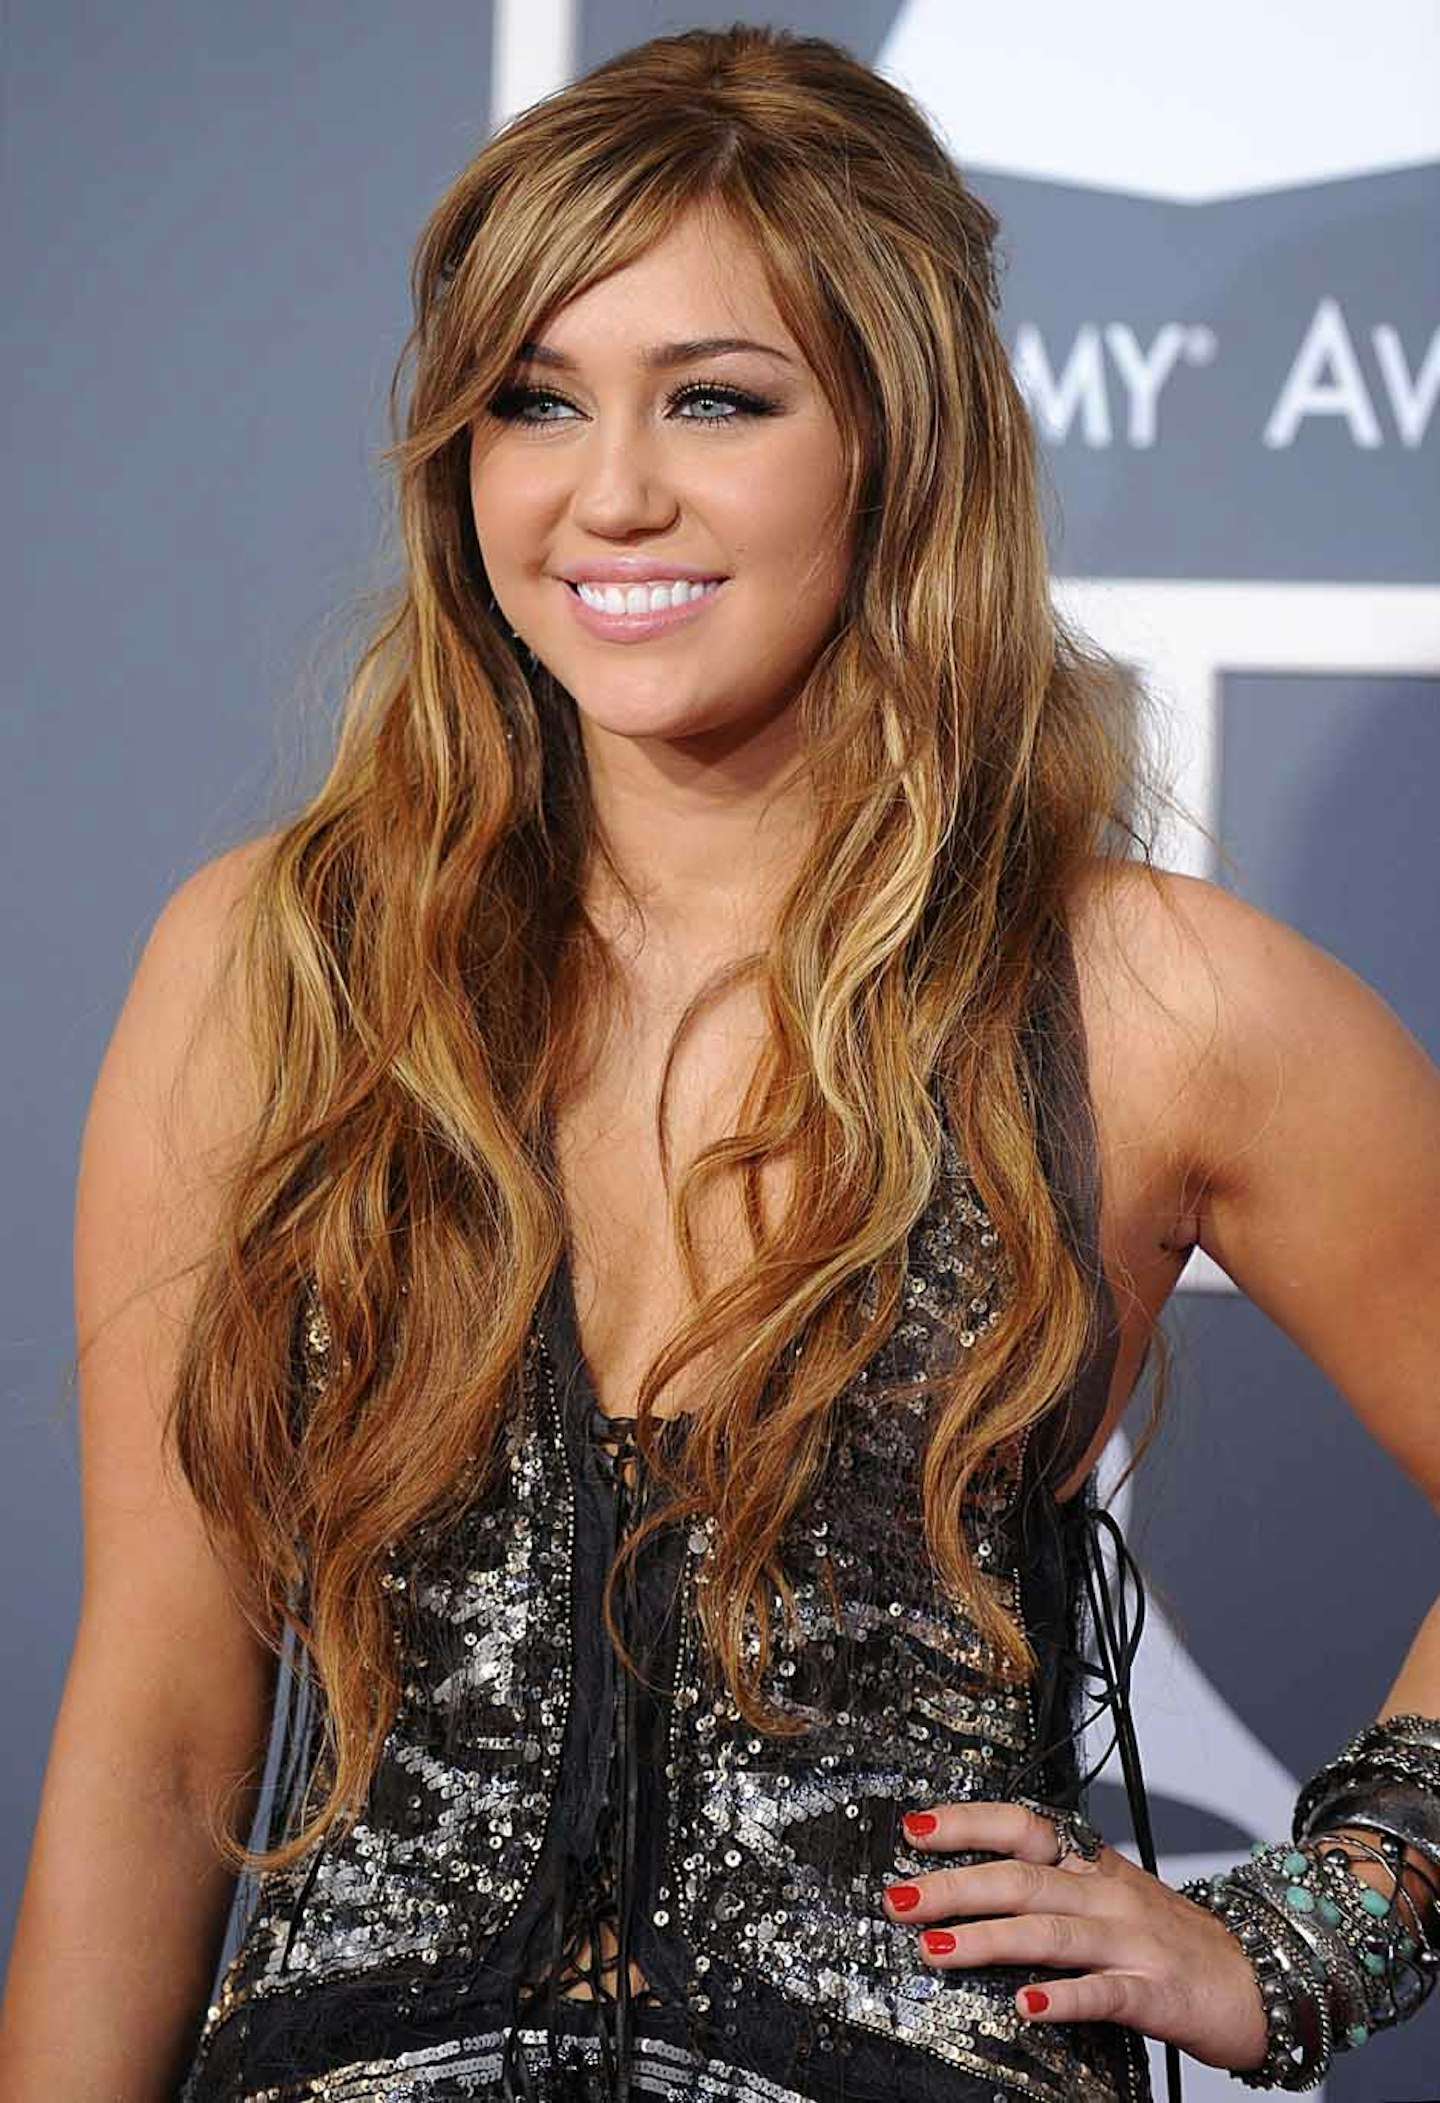 Miley arriving at the 53rd Annual Grammy Awards (2011)